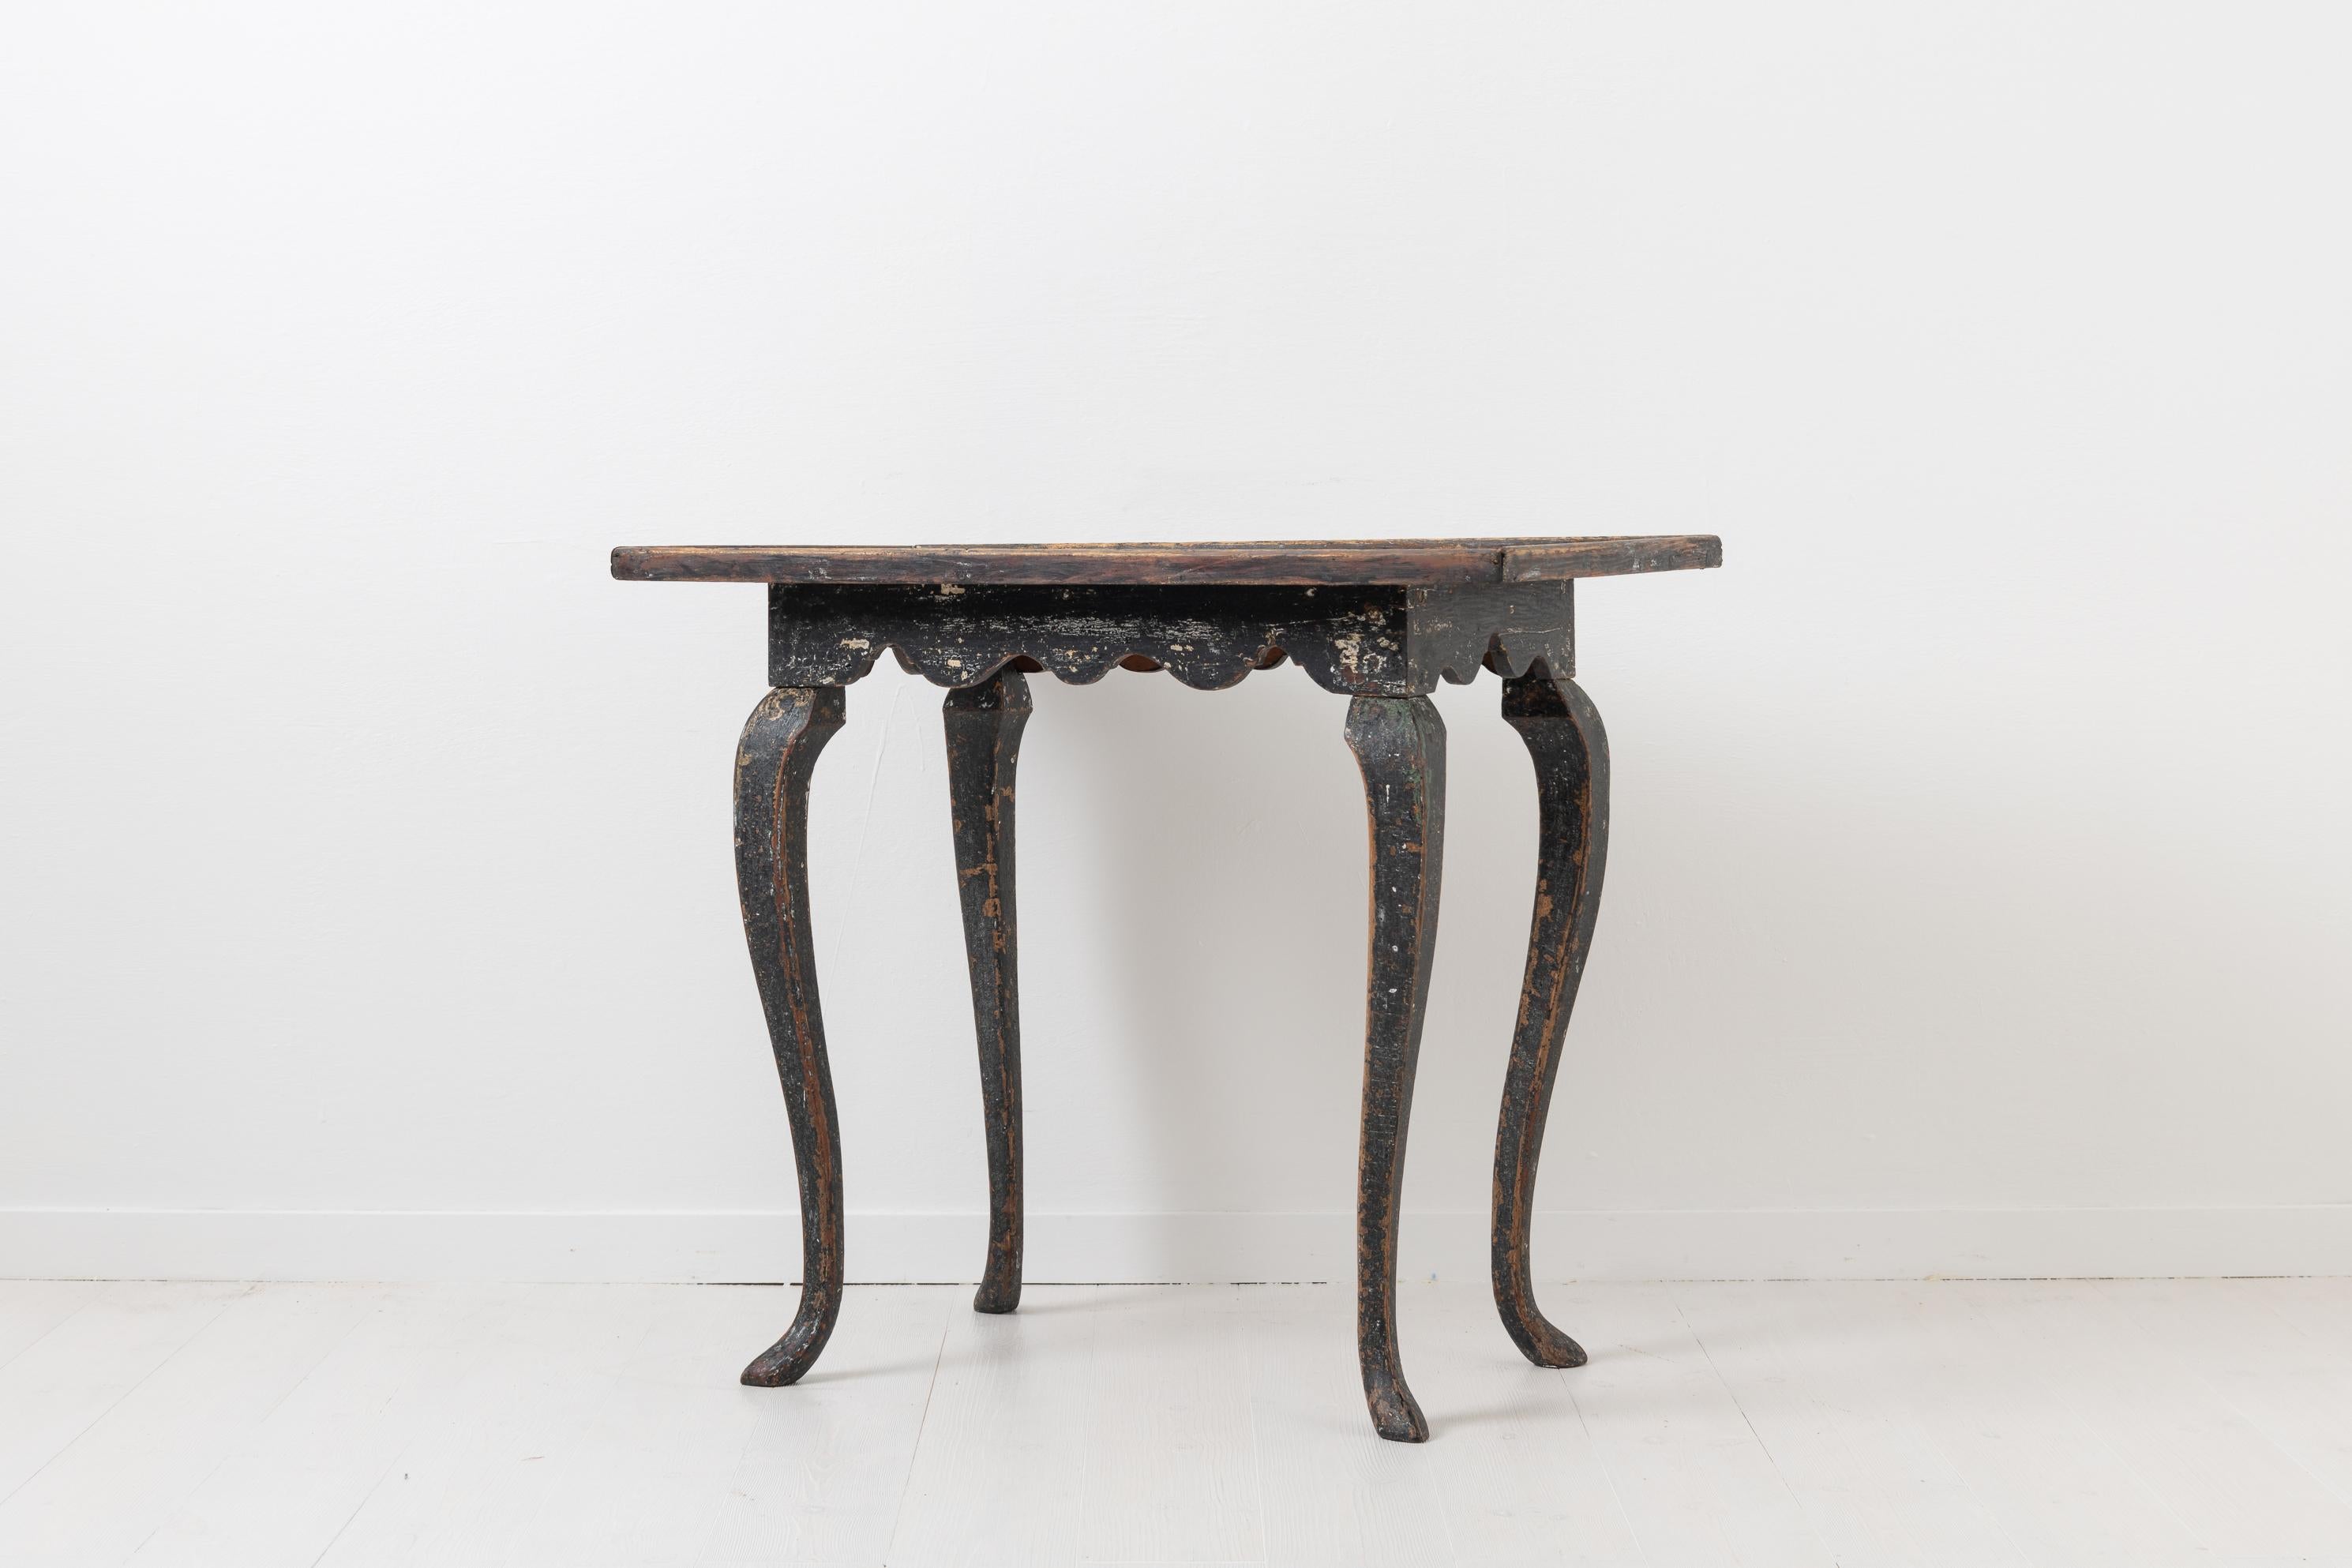 Swedish rococo table with black historic paint. The table is made in northern Sweden circa 1770 from Swedish pine. It was painted black during the 1800s and the paint has since then become distressed with traces of an older light paint showing